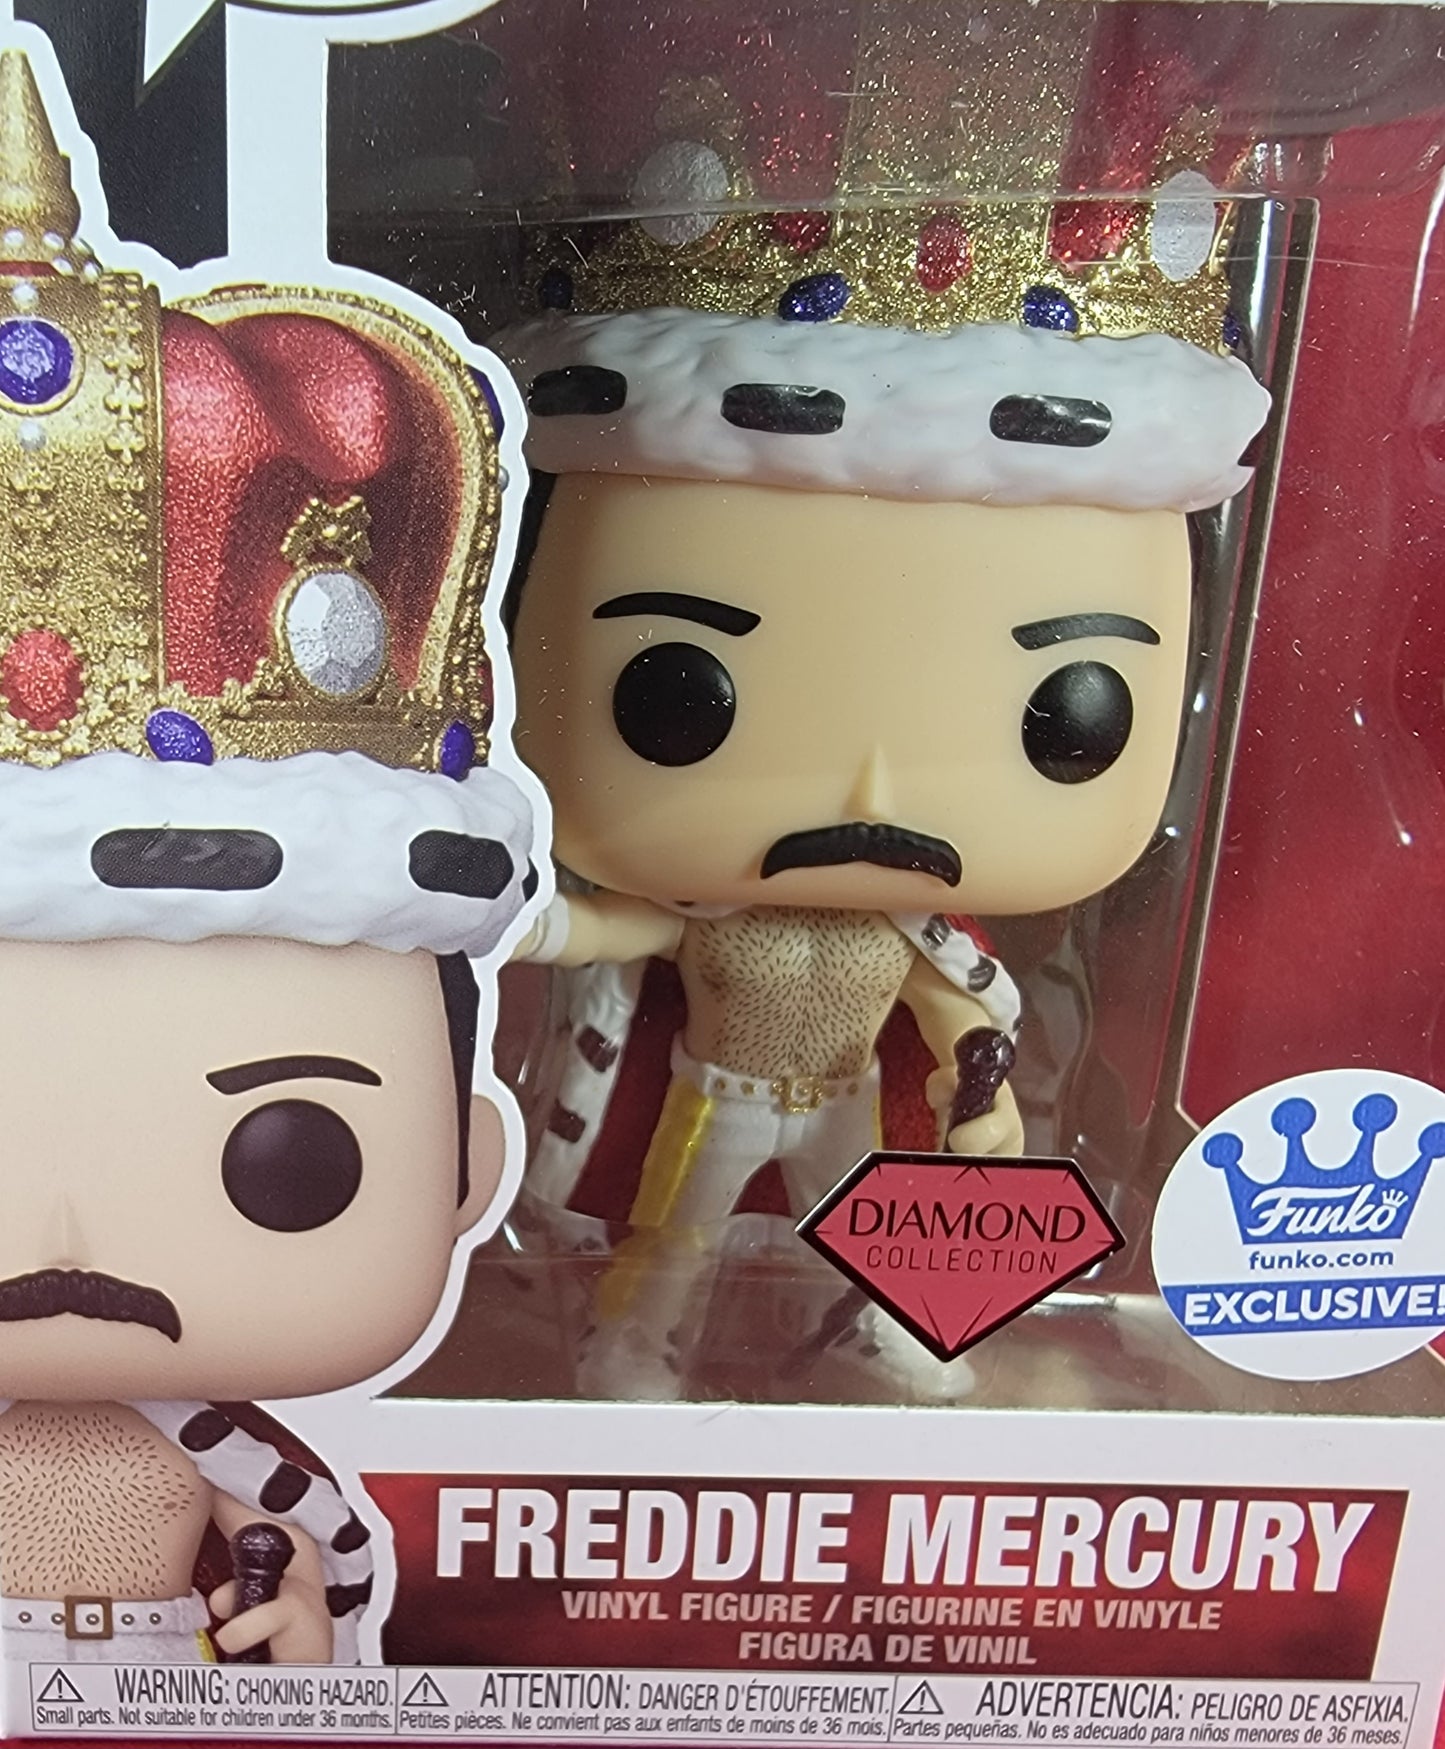 Freddie mercury funko exclusive # 184 (nib)
brand new diamond exclusive mercury funko pop. pop has Freddie of queen in kings outfit covered in glitter. pop has some lite scratches and will be shipped in a compatible pop protector.